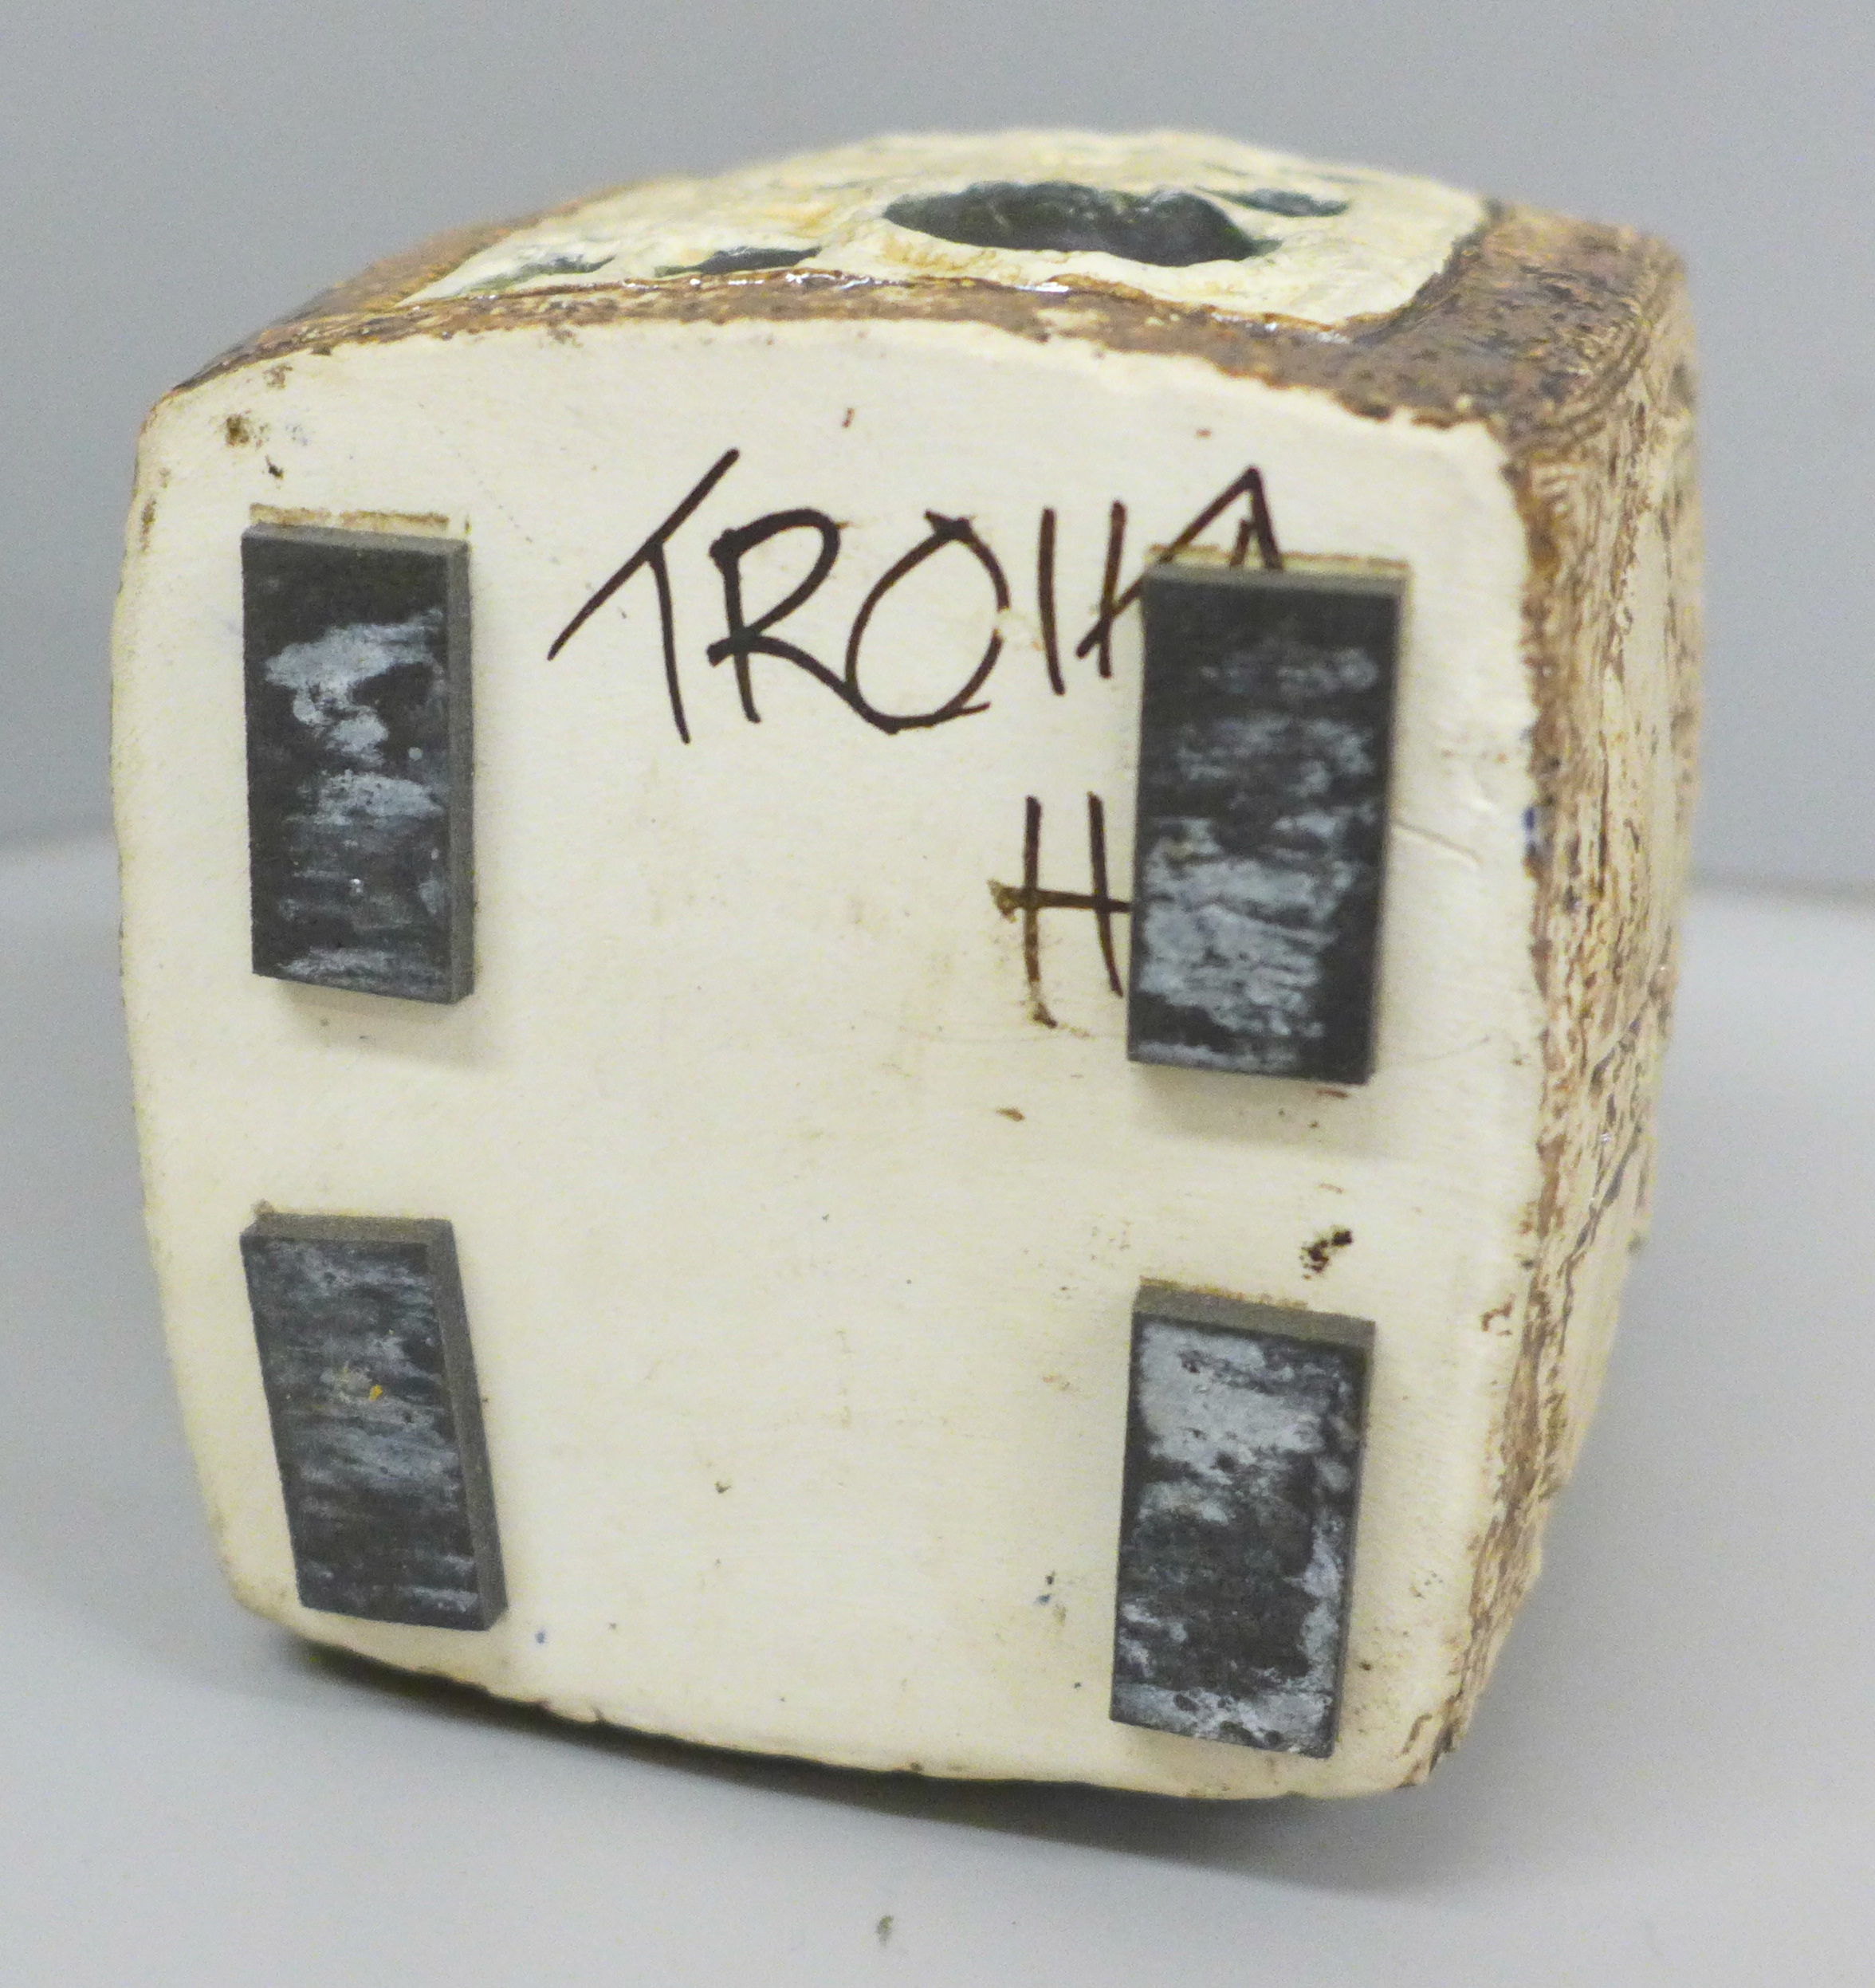 A Troika marmalade jar by Honor Curtis, 10cm - Image 3 of 3